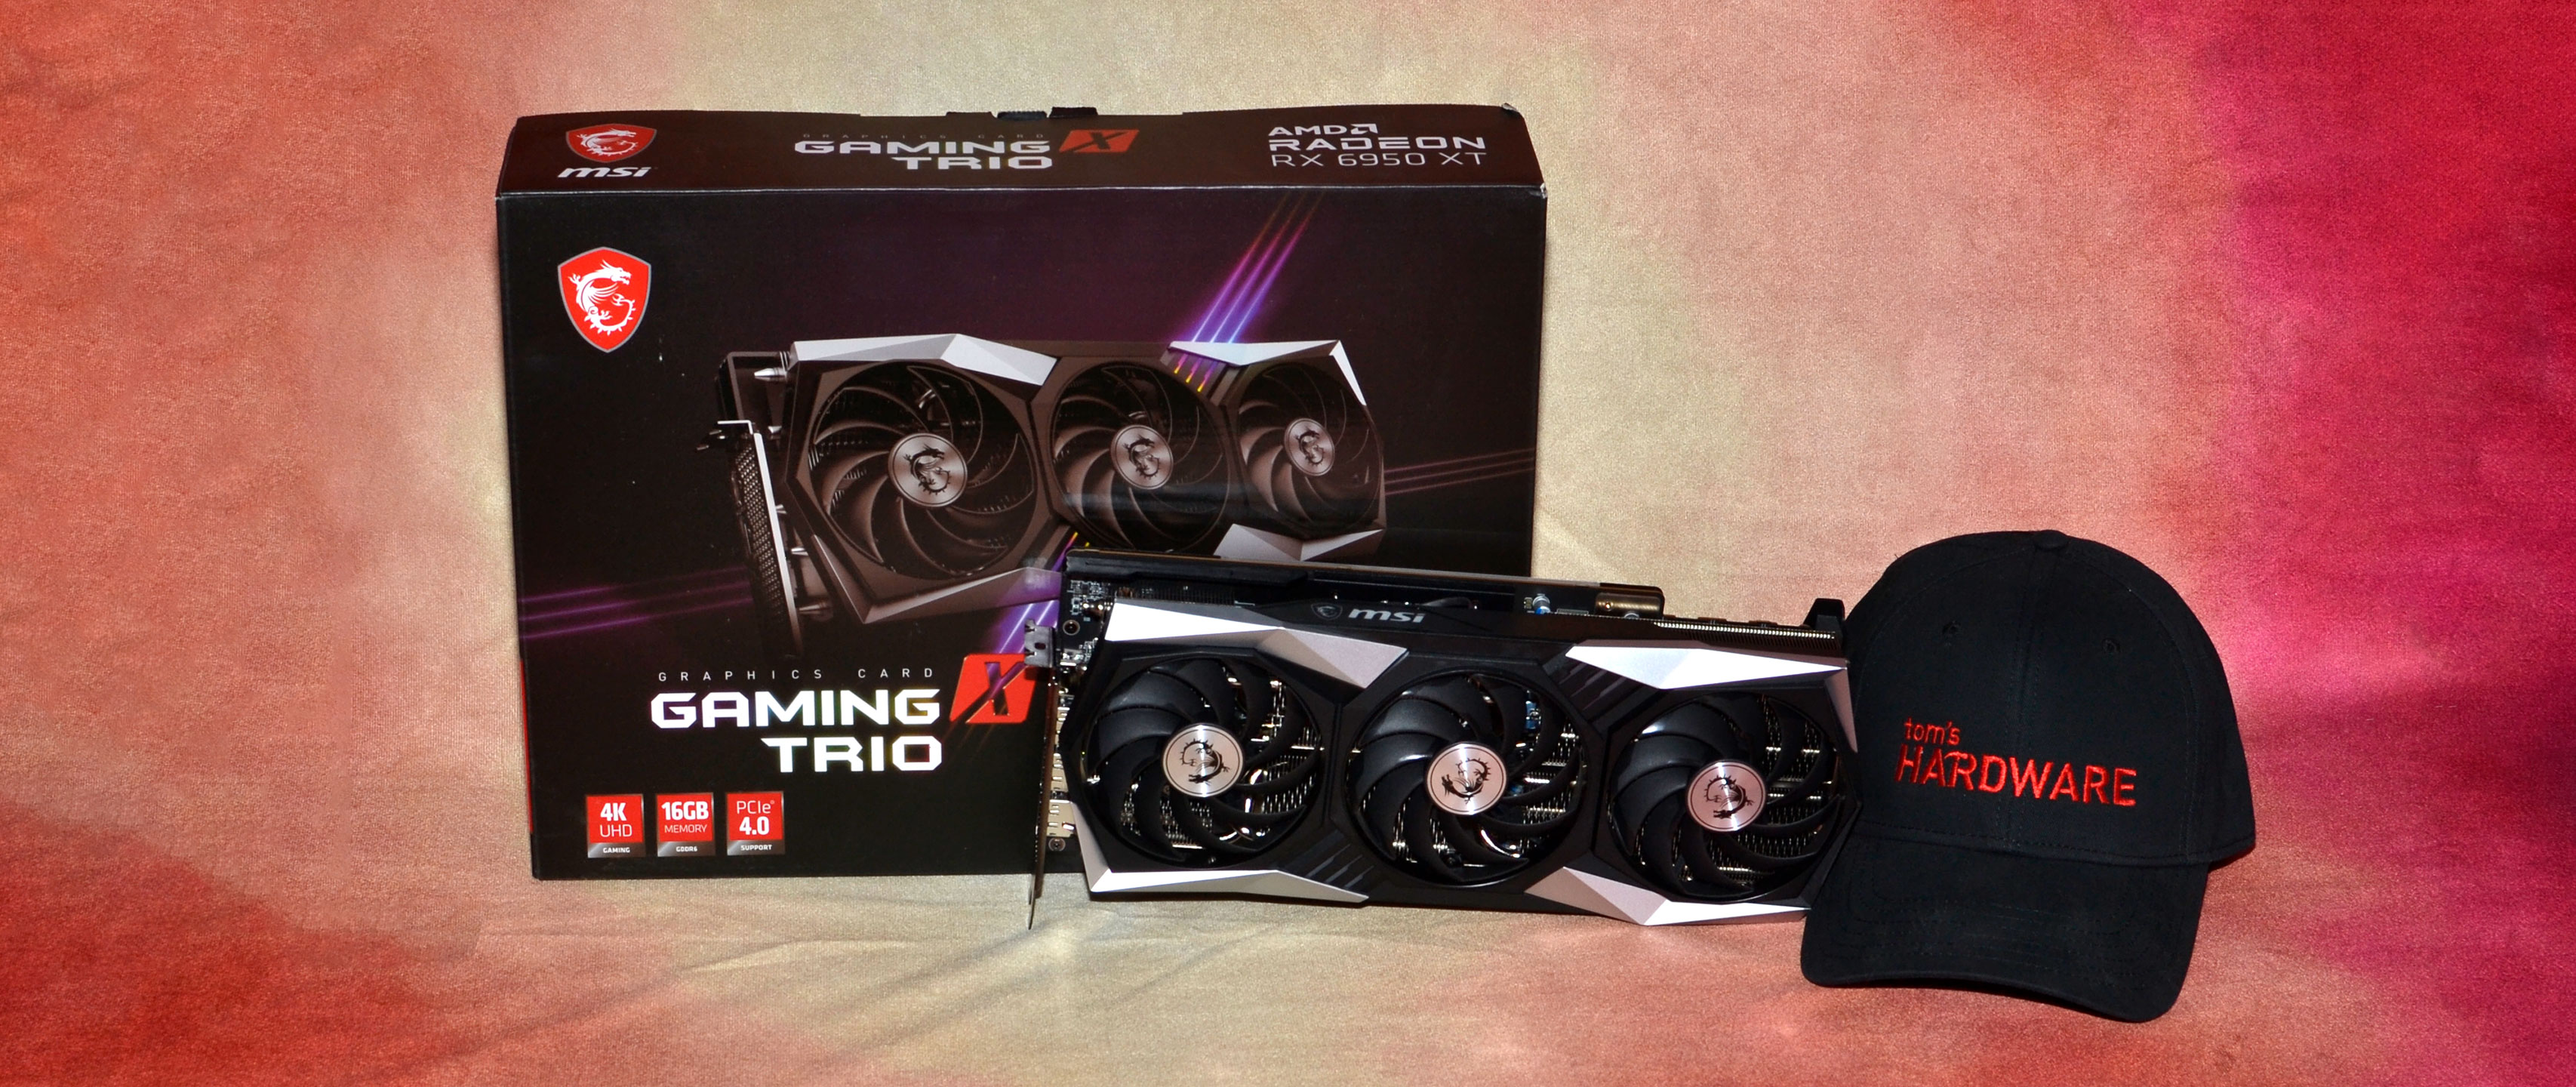 MSI Radeon RX 6950 XT Gaming X Trio Review: Power Hungry